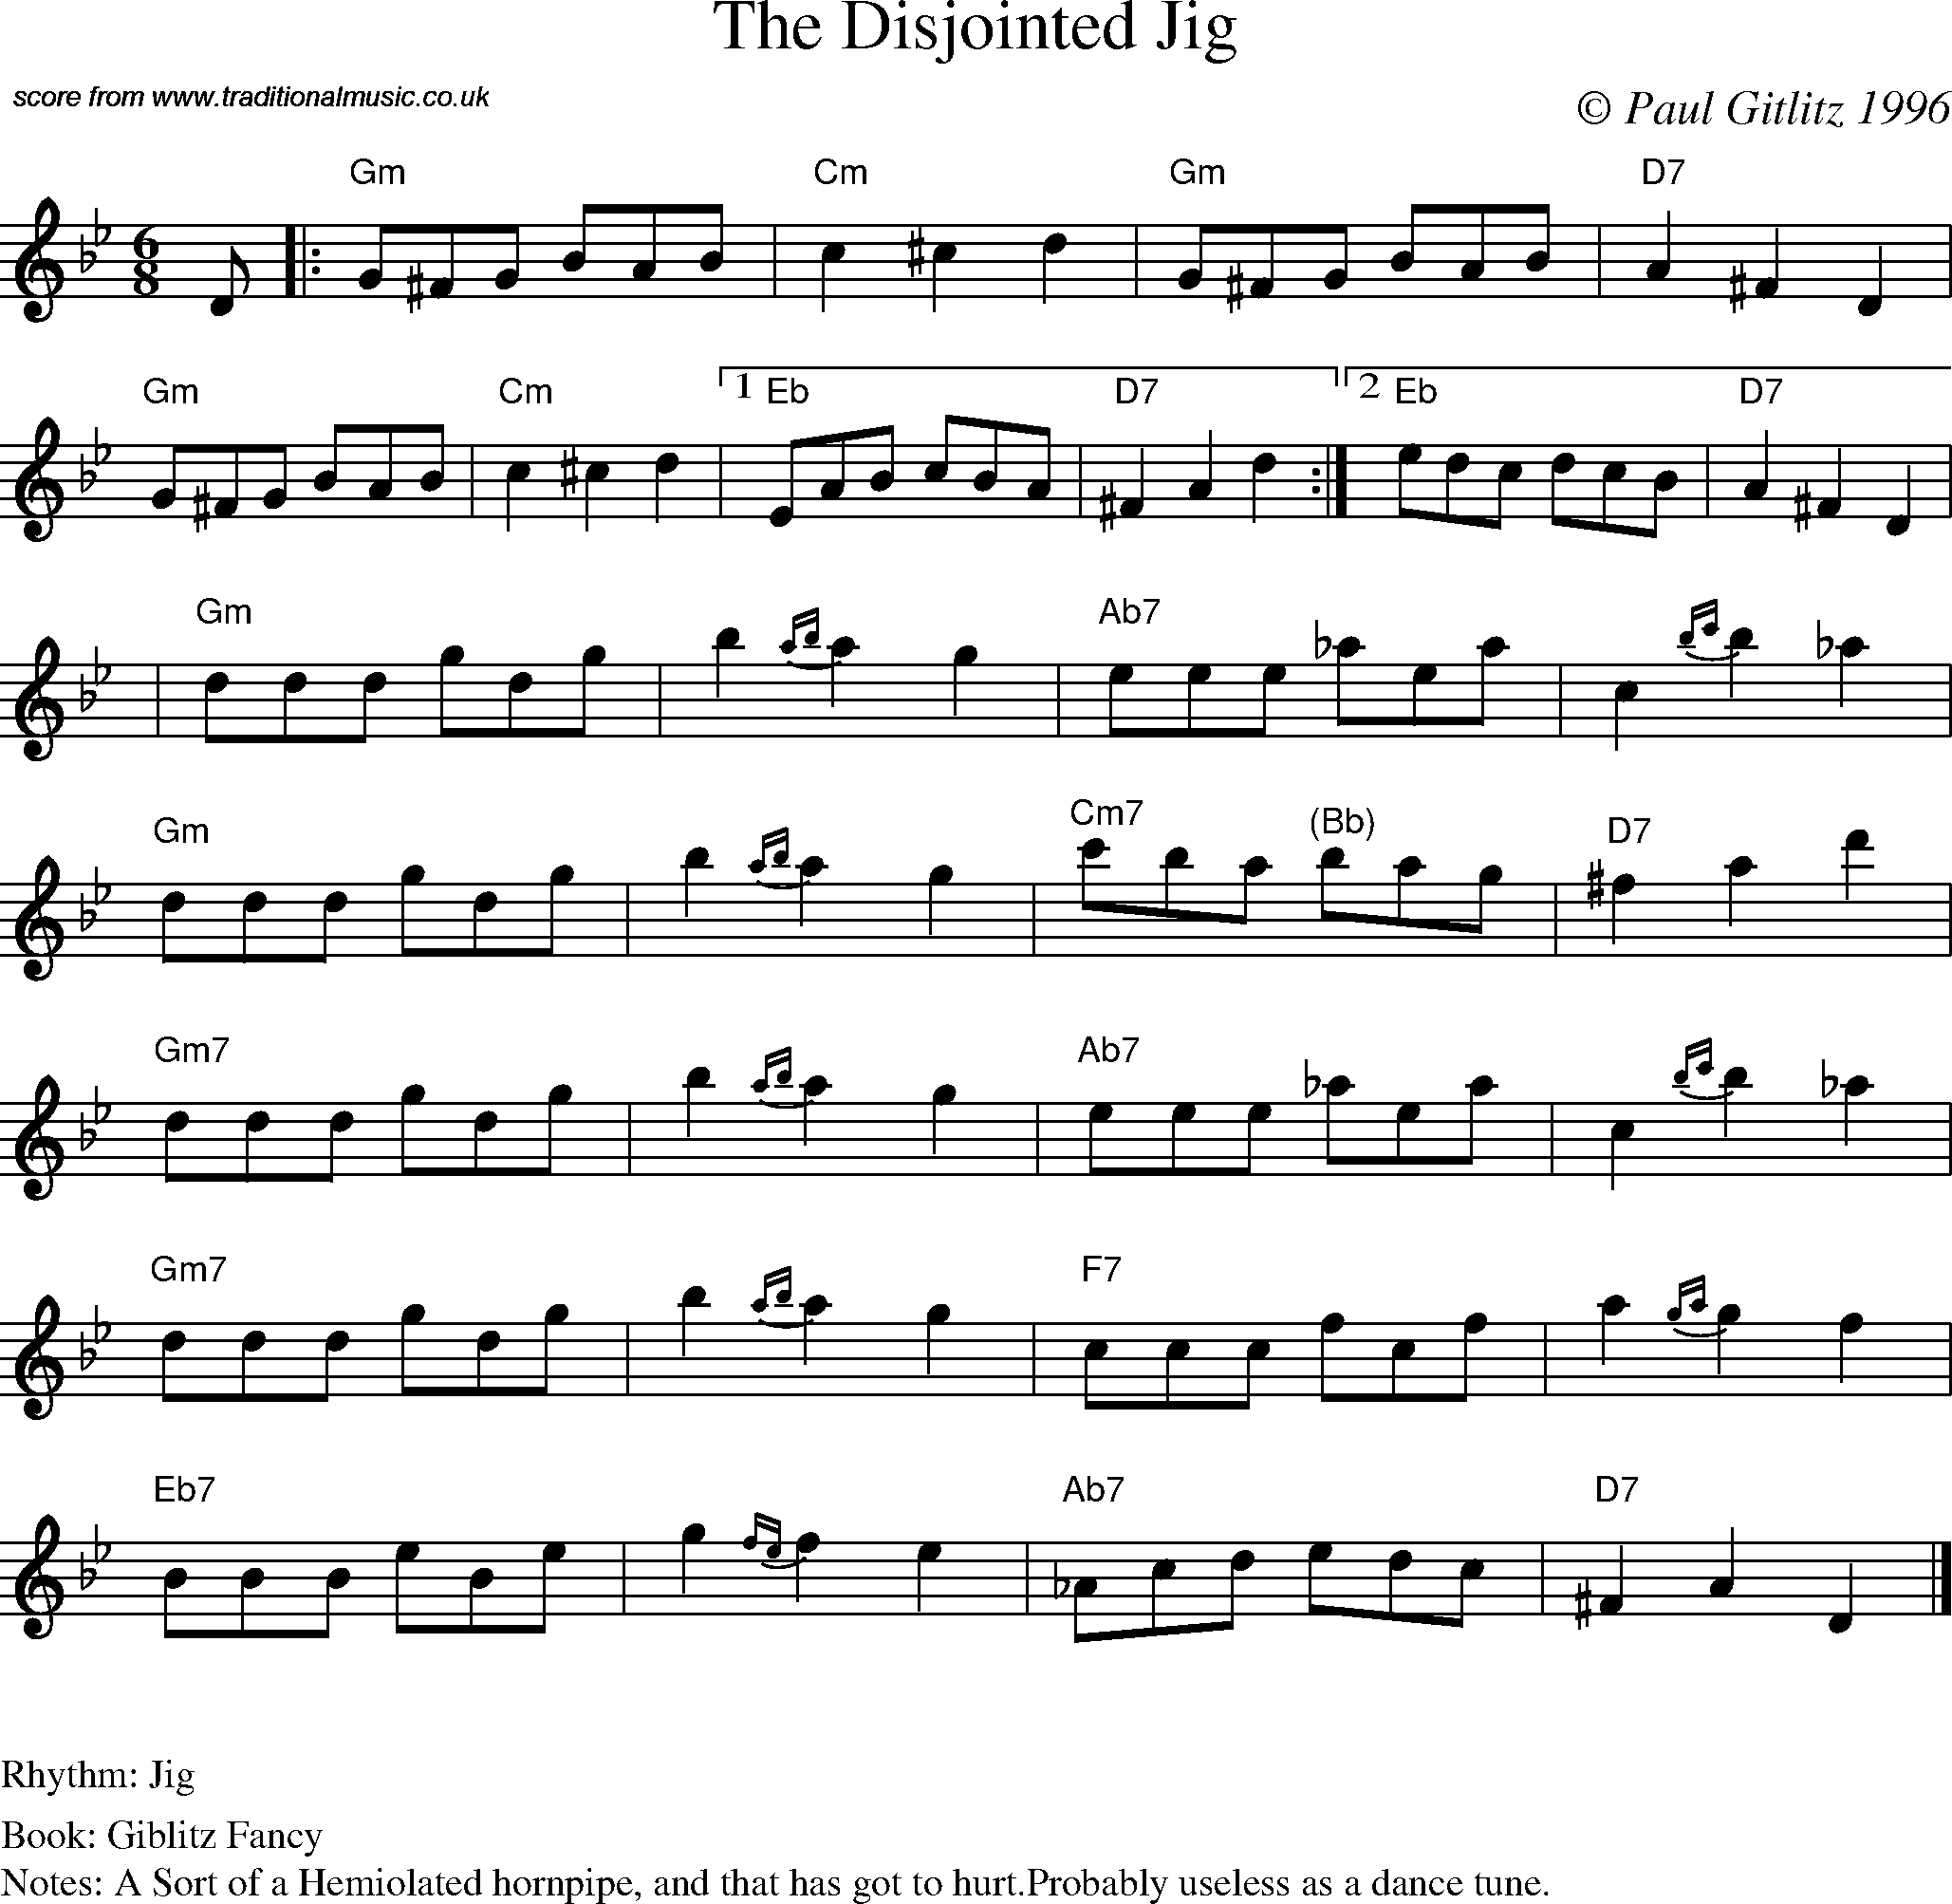 Sheet Music Score for Jig - The Disjointed Jig